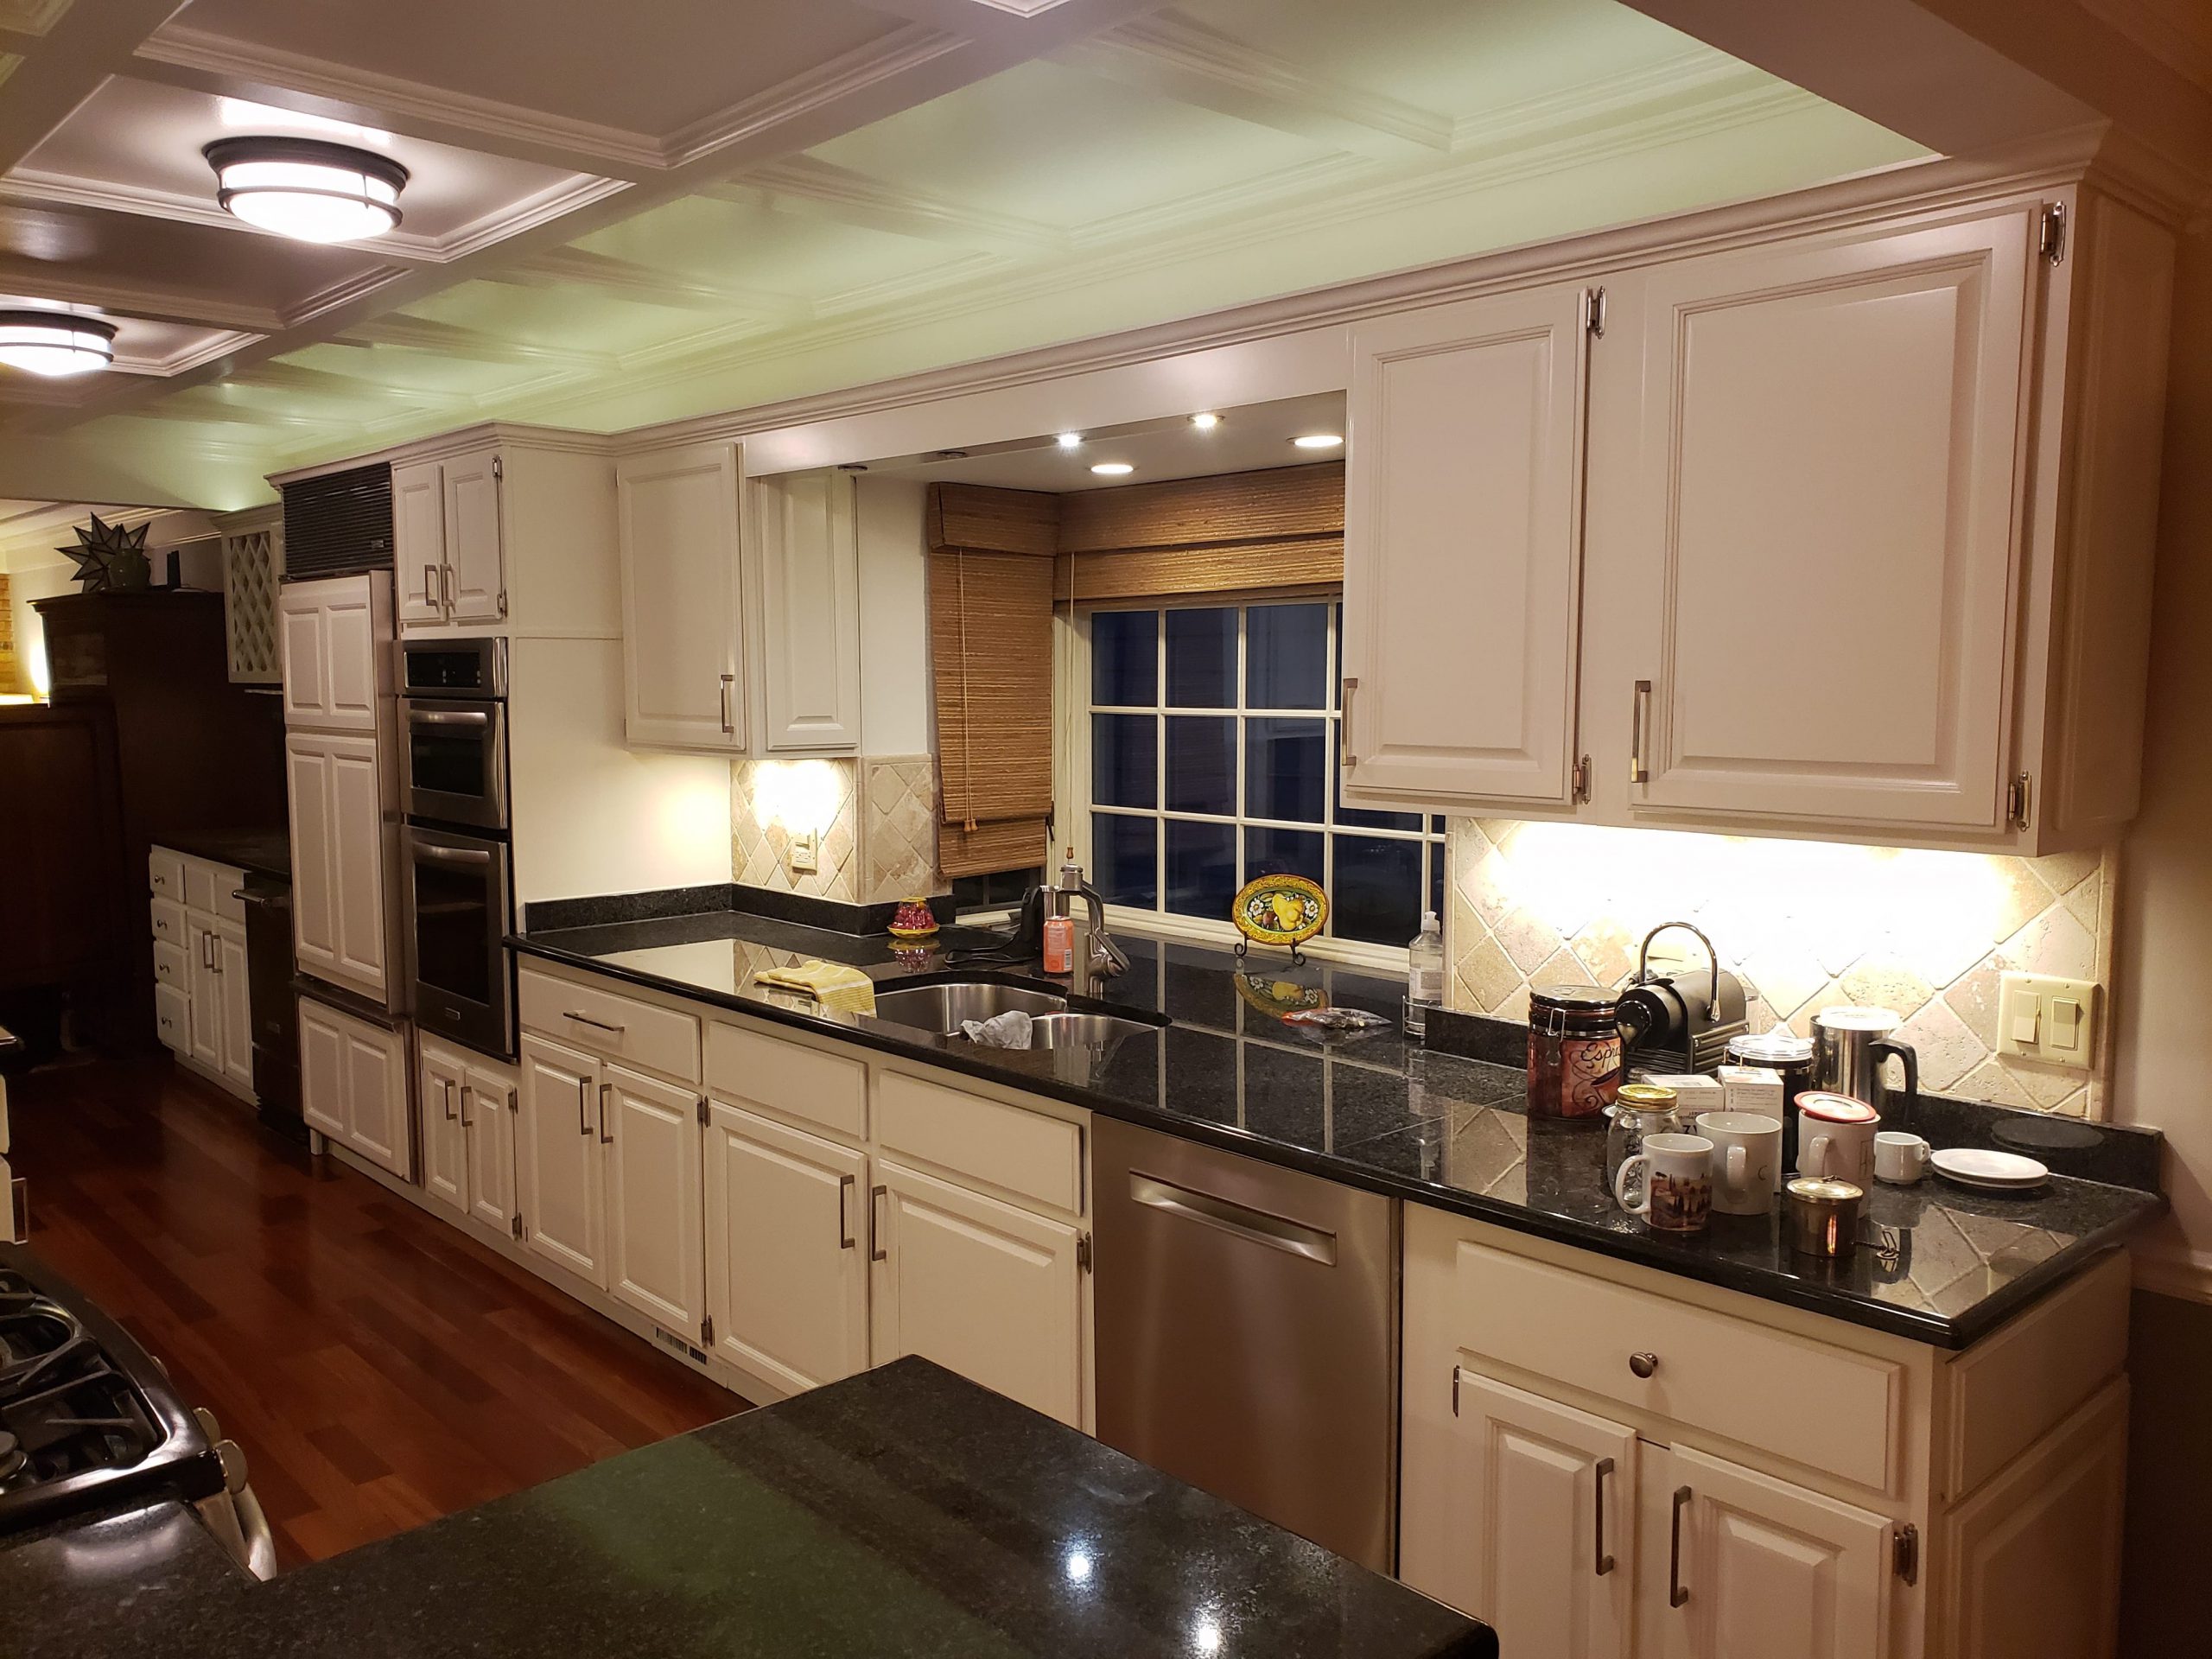 interior-painters-spray-painting-cabinets